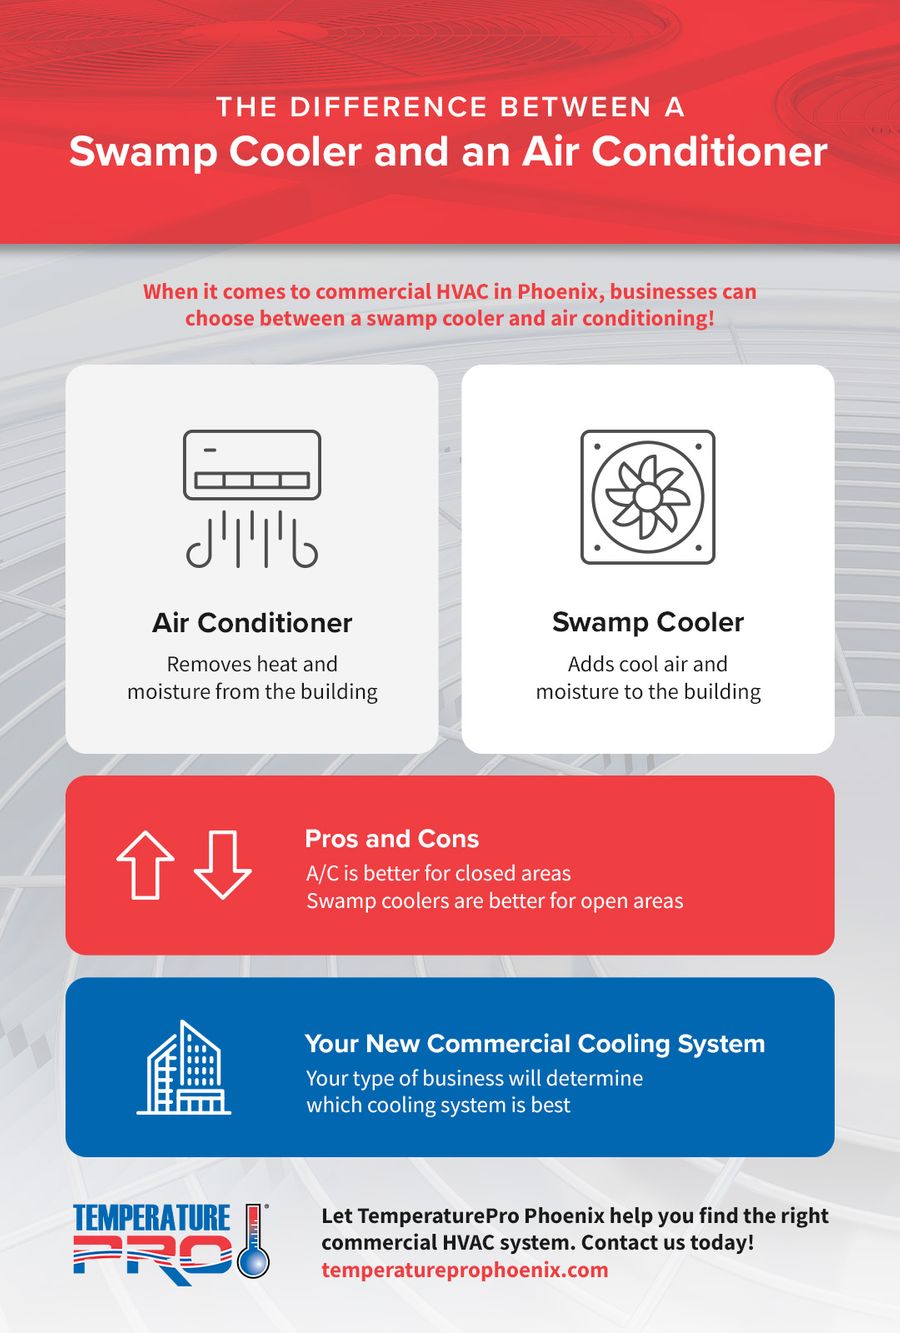 The Difference Between a Swamp Cooler and an Air Conditioner_Infographic.jpg